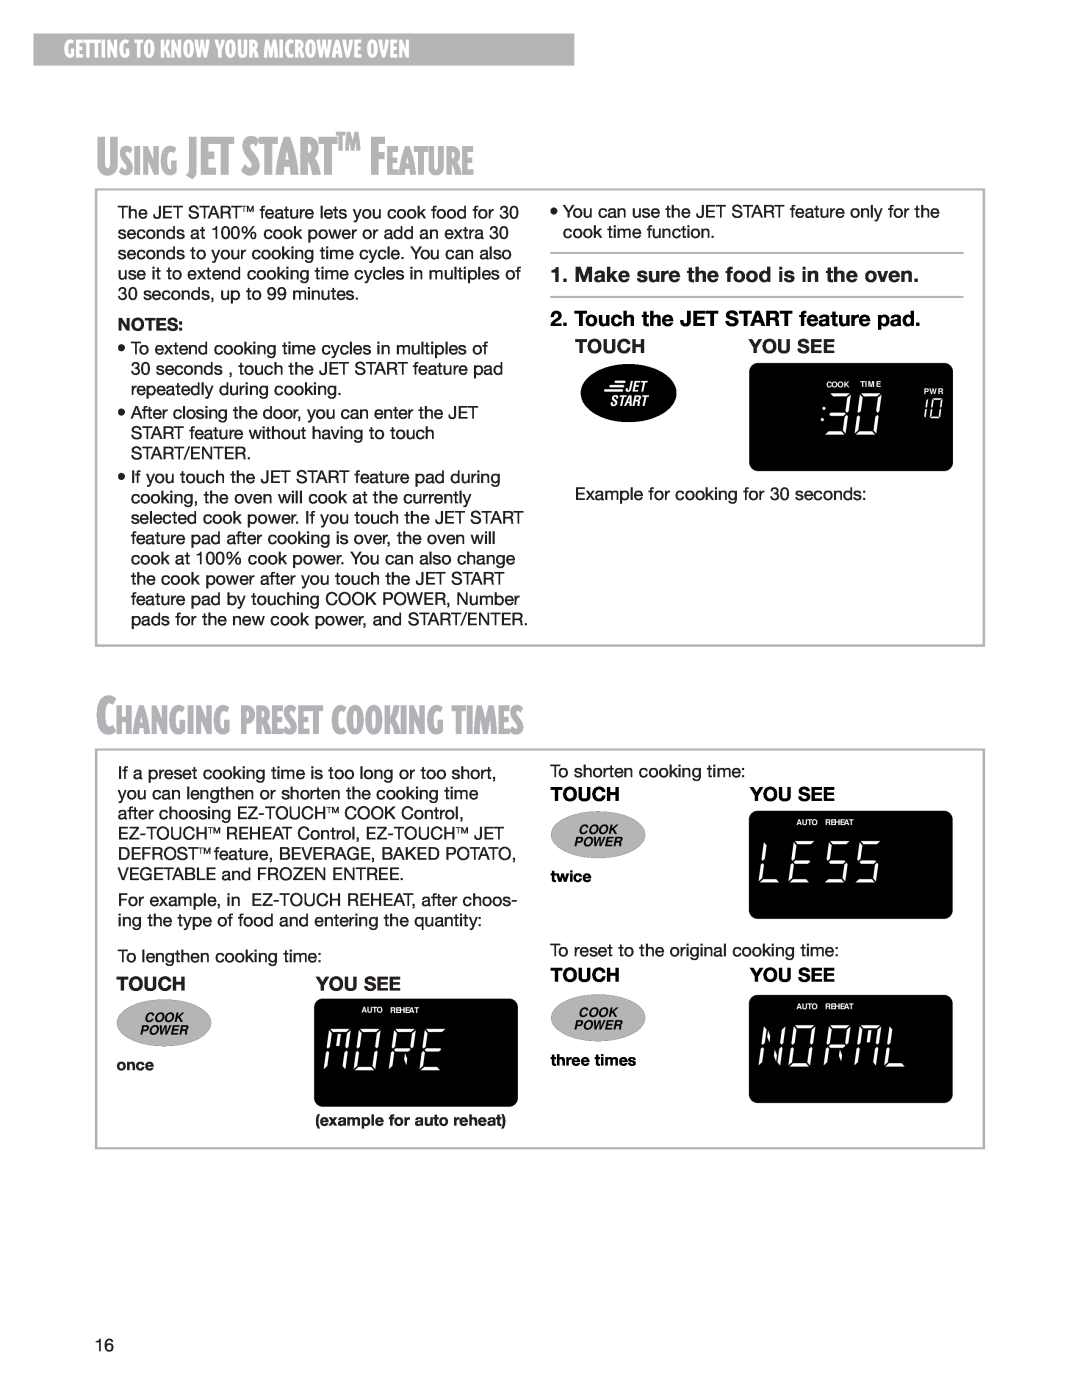 Whirlpool MH8150XJ Using Jet Starttm Feature, Changing Preset Cooking Times, Make sure the food is in the oven, You See 